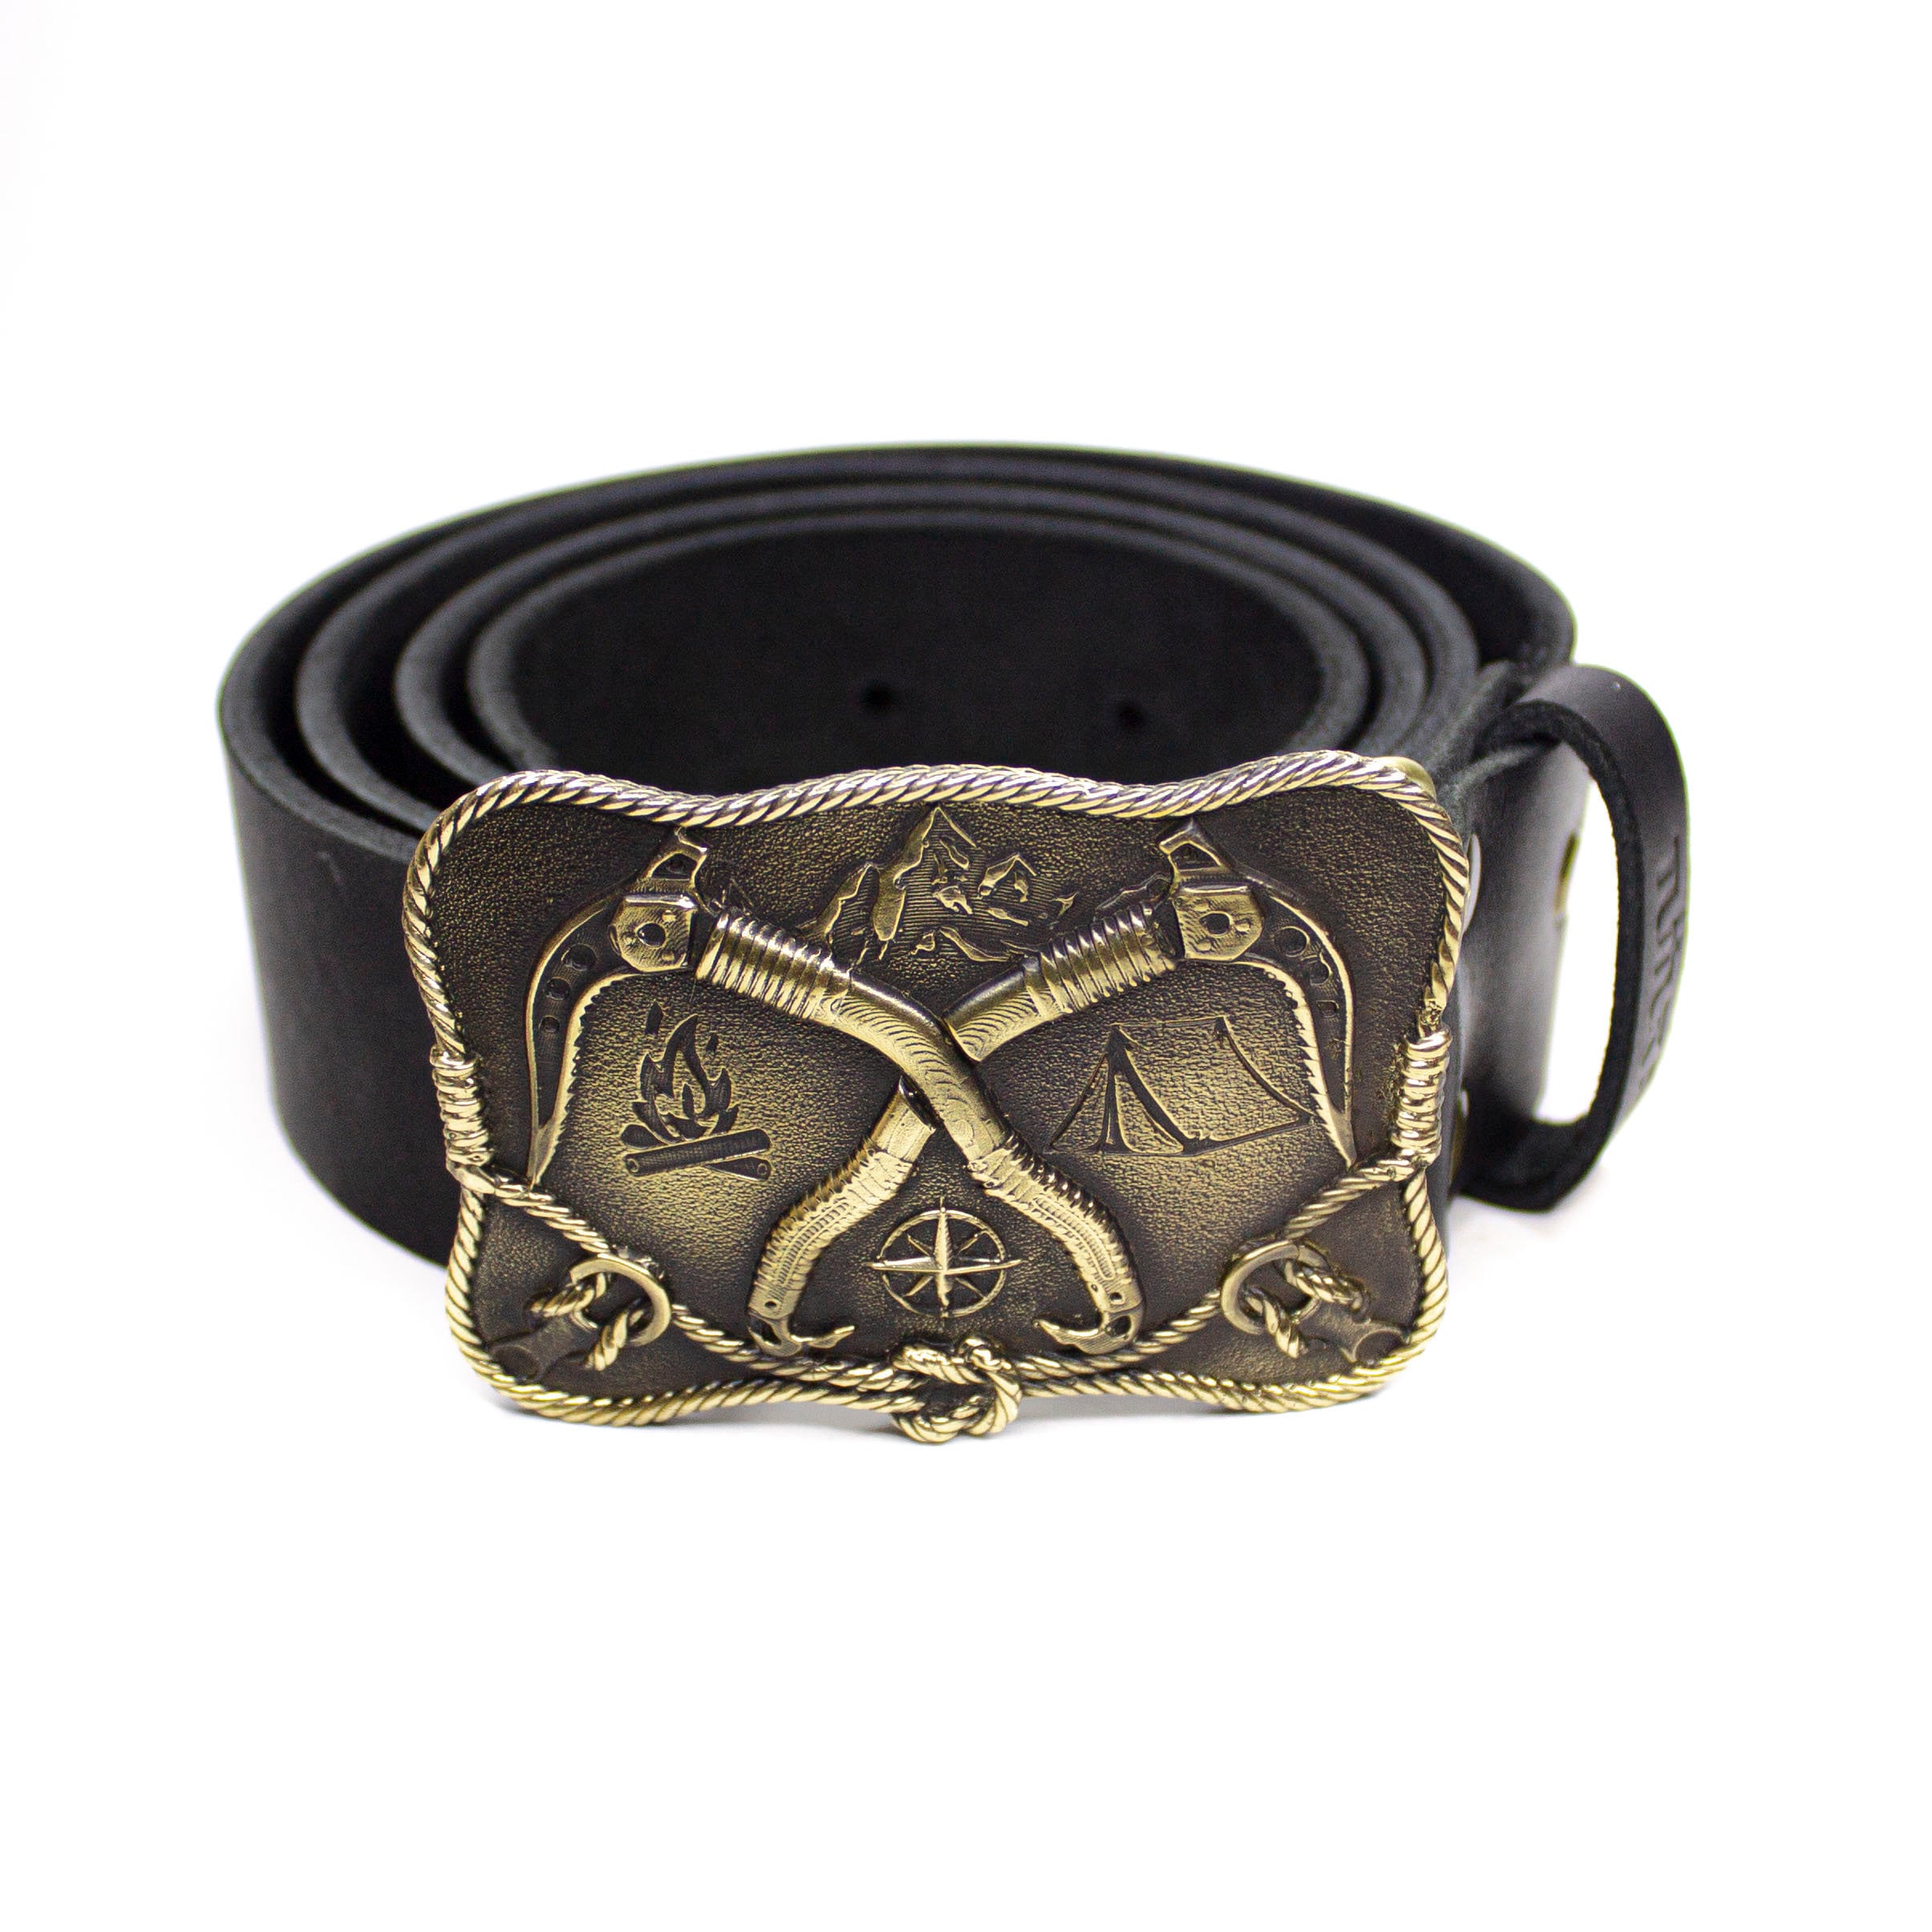 Leather Climber Belt With Brass rise Call Buckle, Belt With. Black